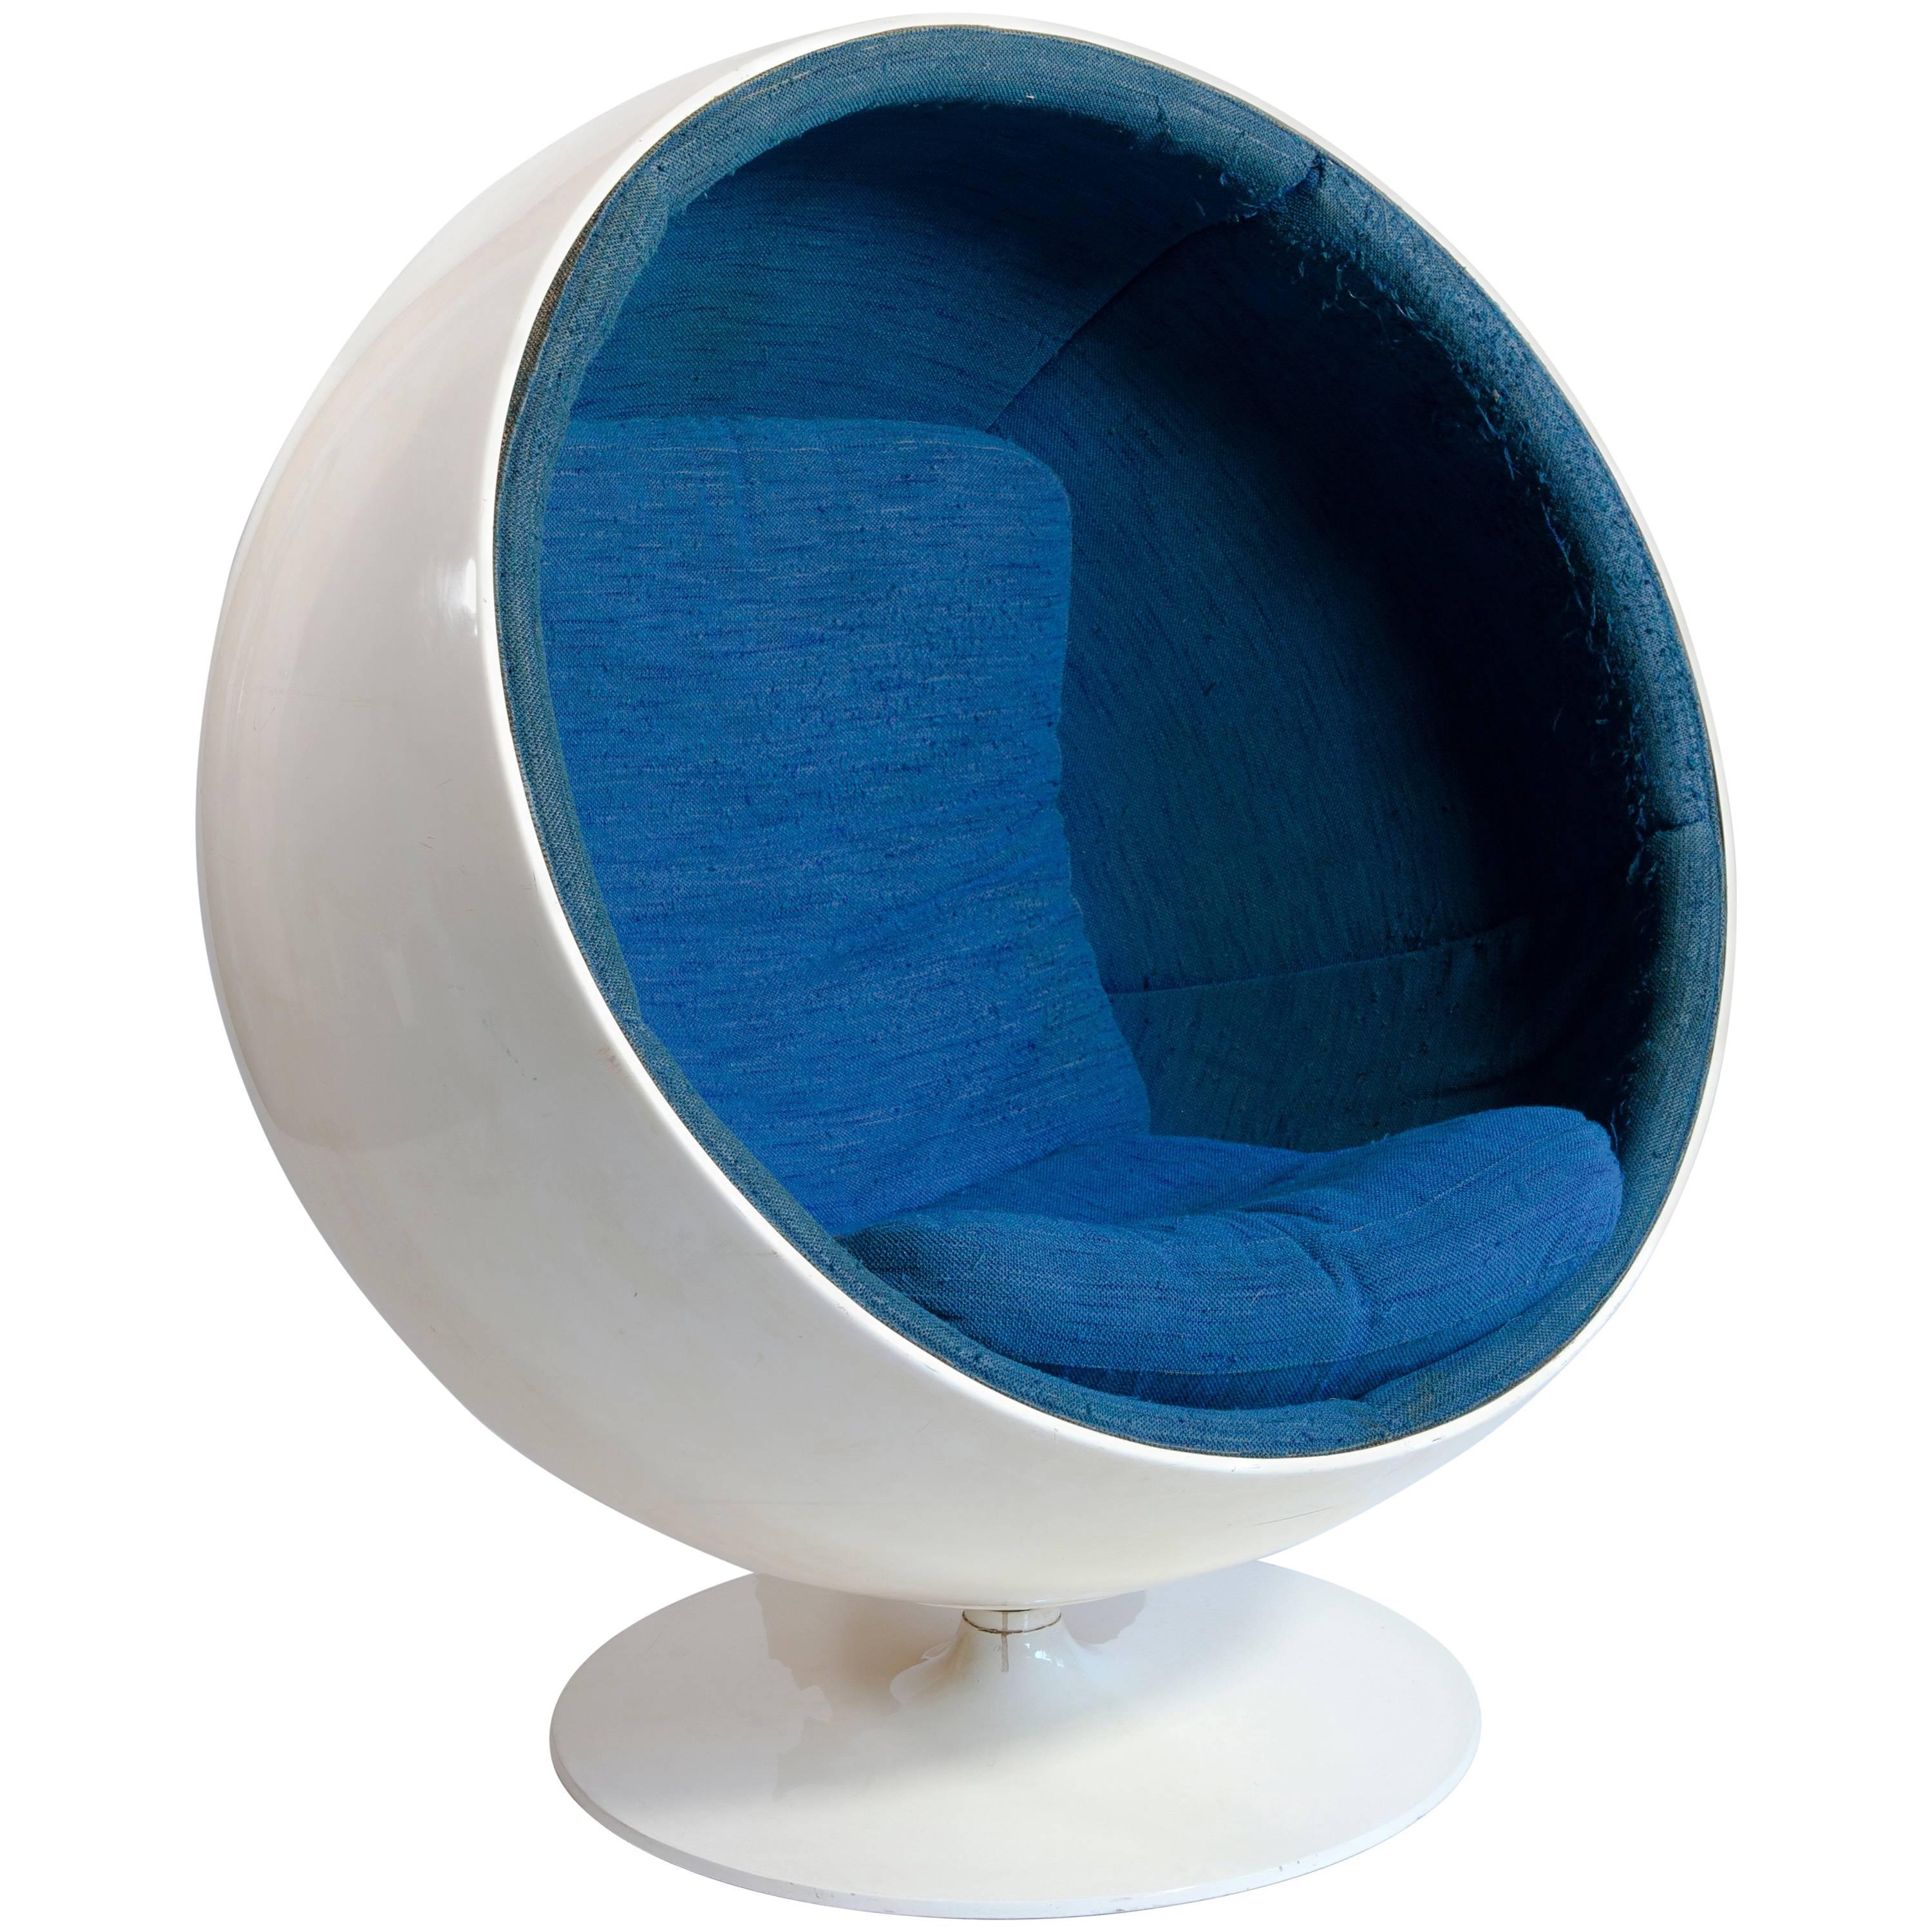 Original Vintage 'Ball Chair' Designed by Eero Aarnio in 1963 For Sale